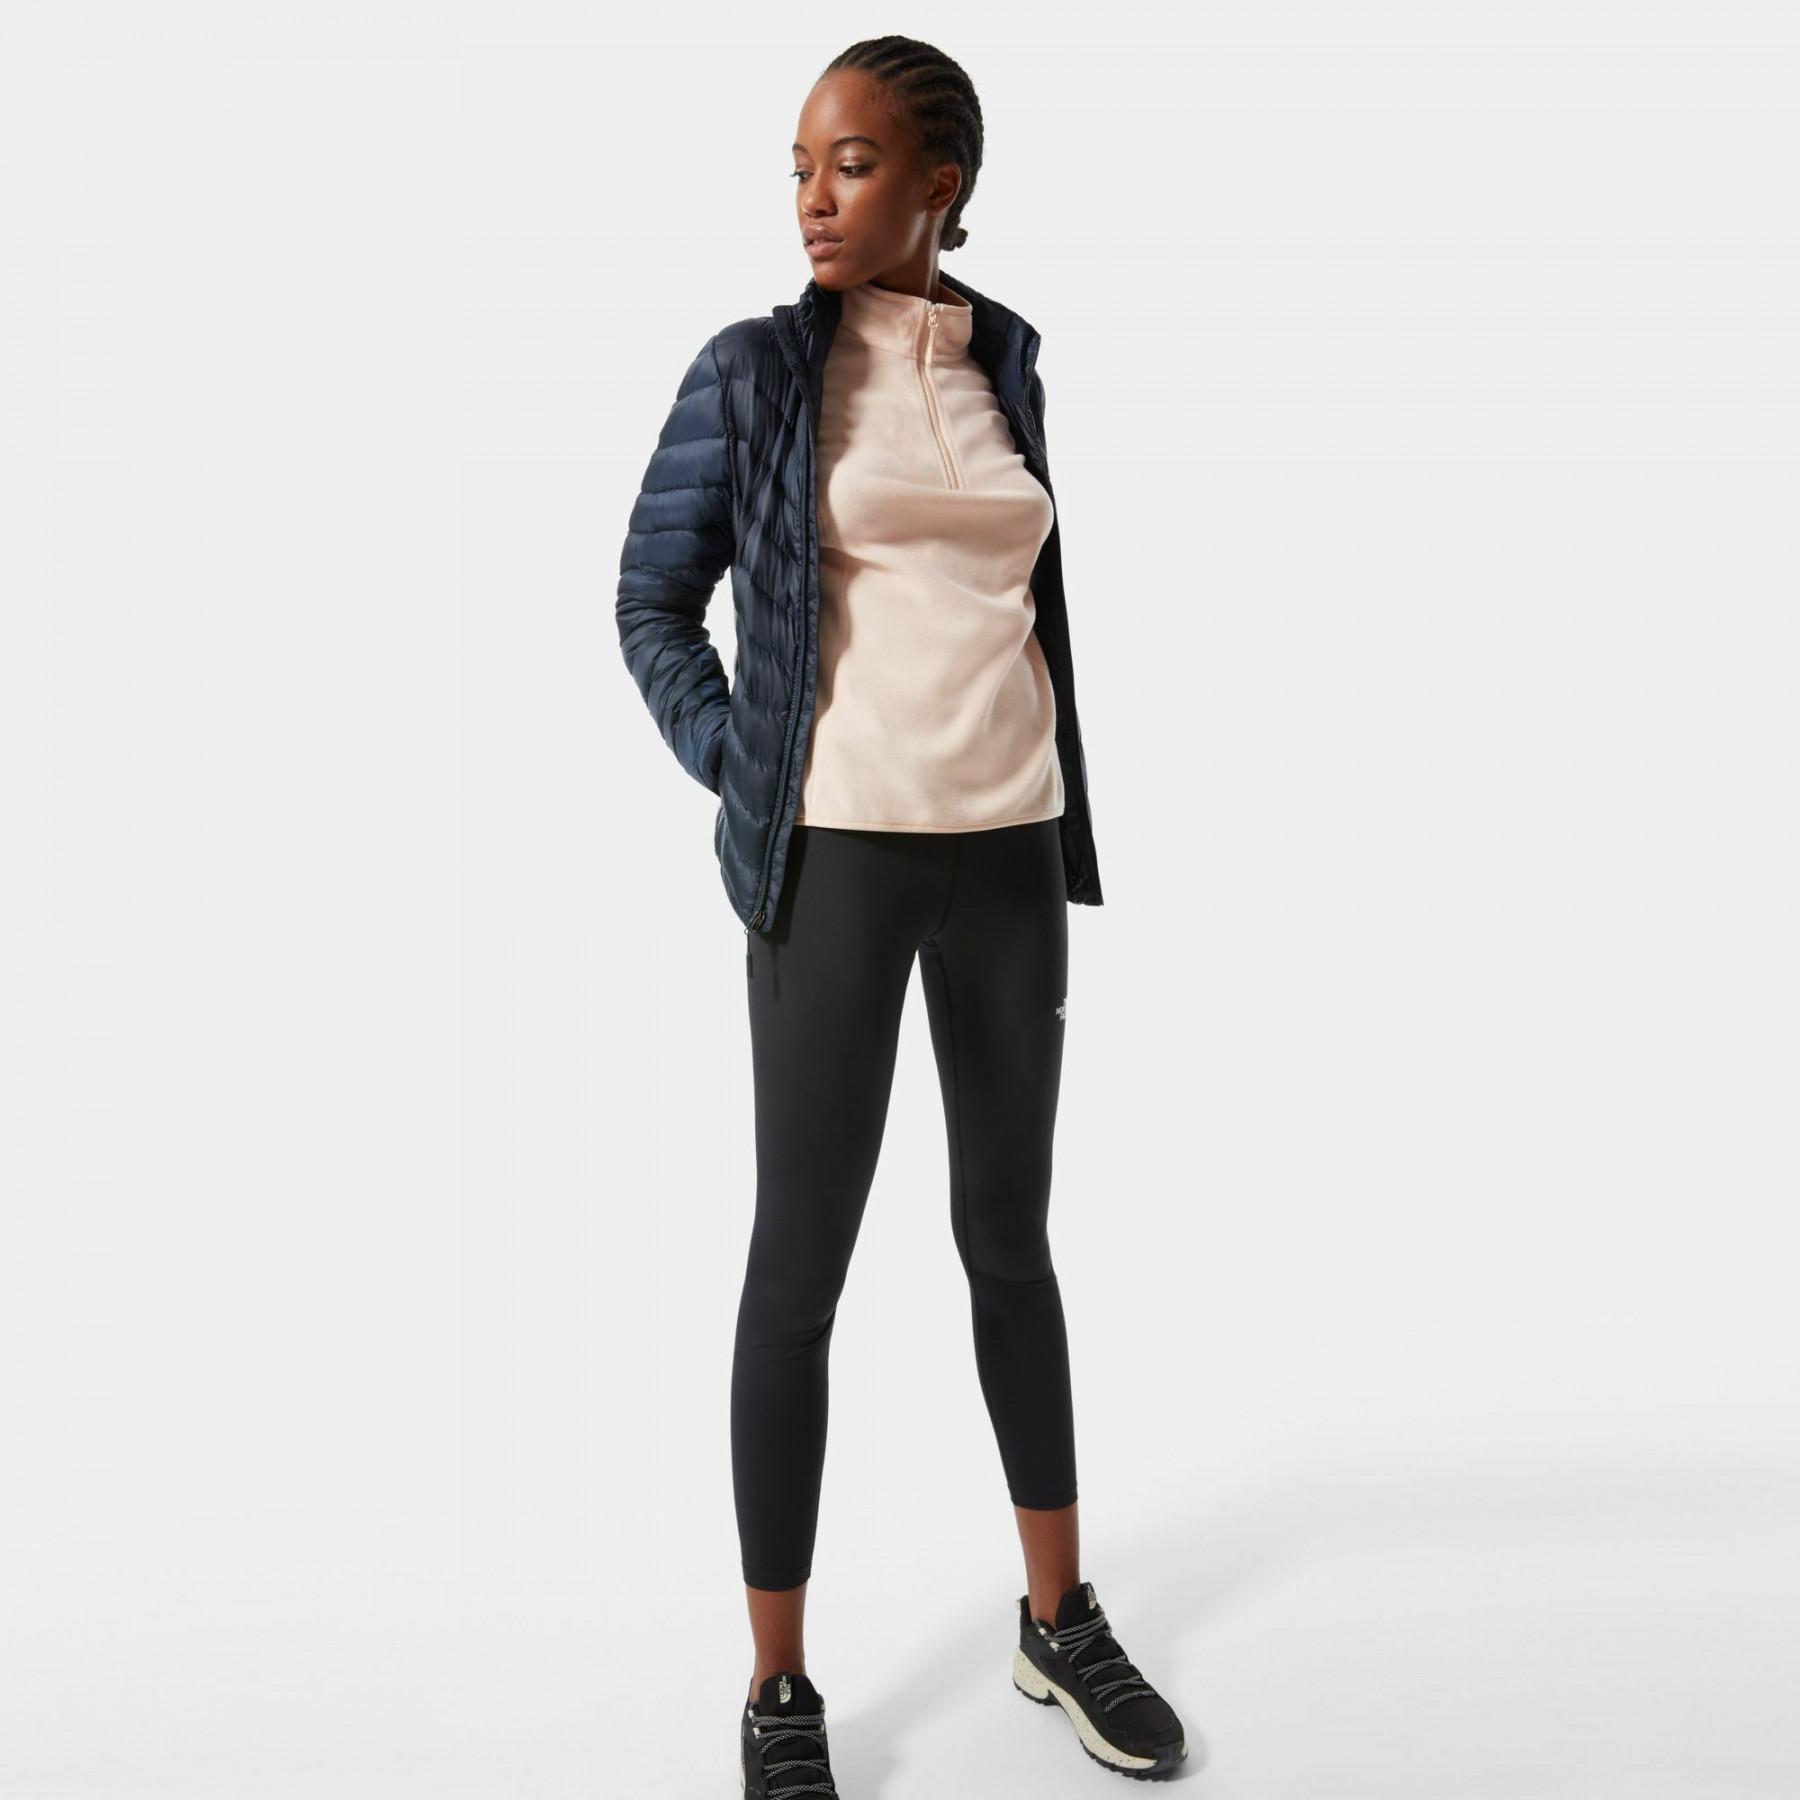 Pull-over femme 1/4 Zip The North Face Polaire 100 Glacier